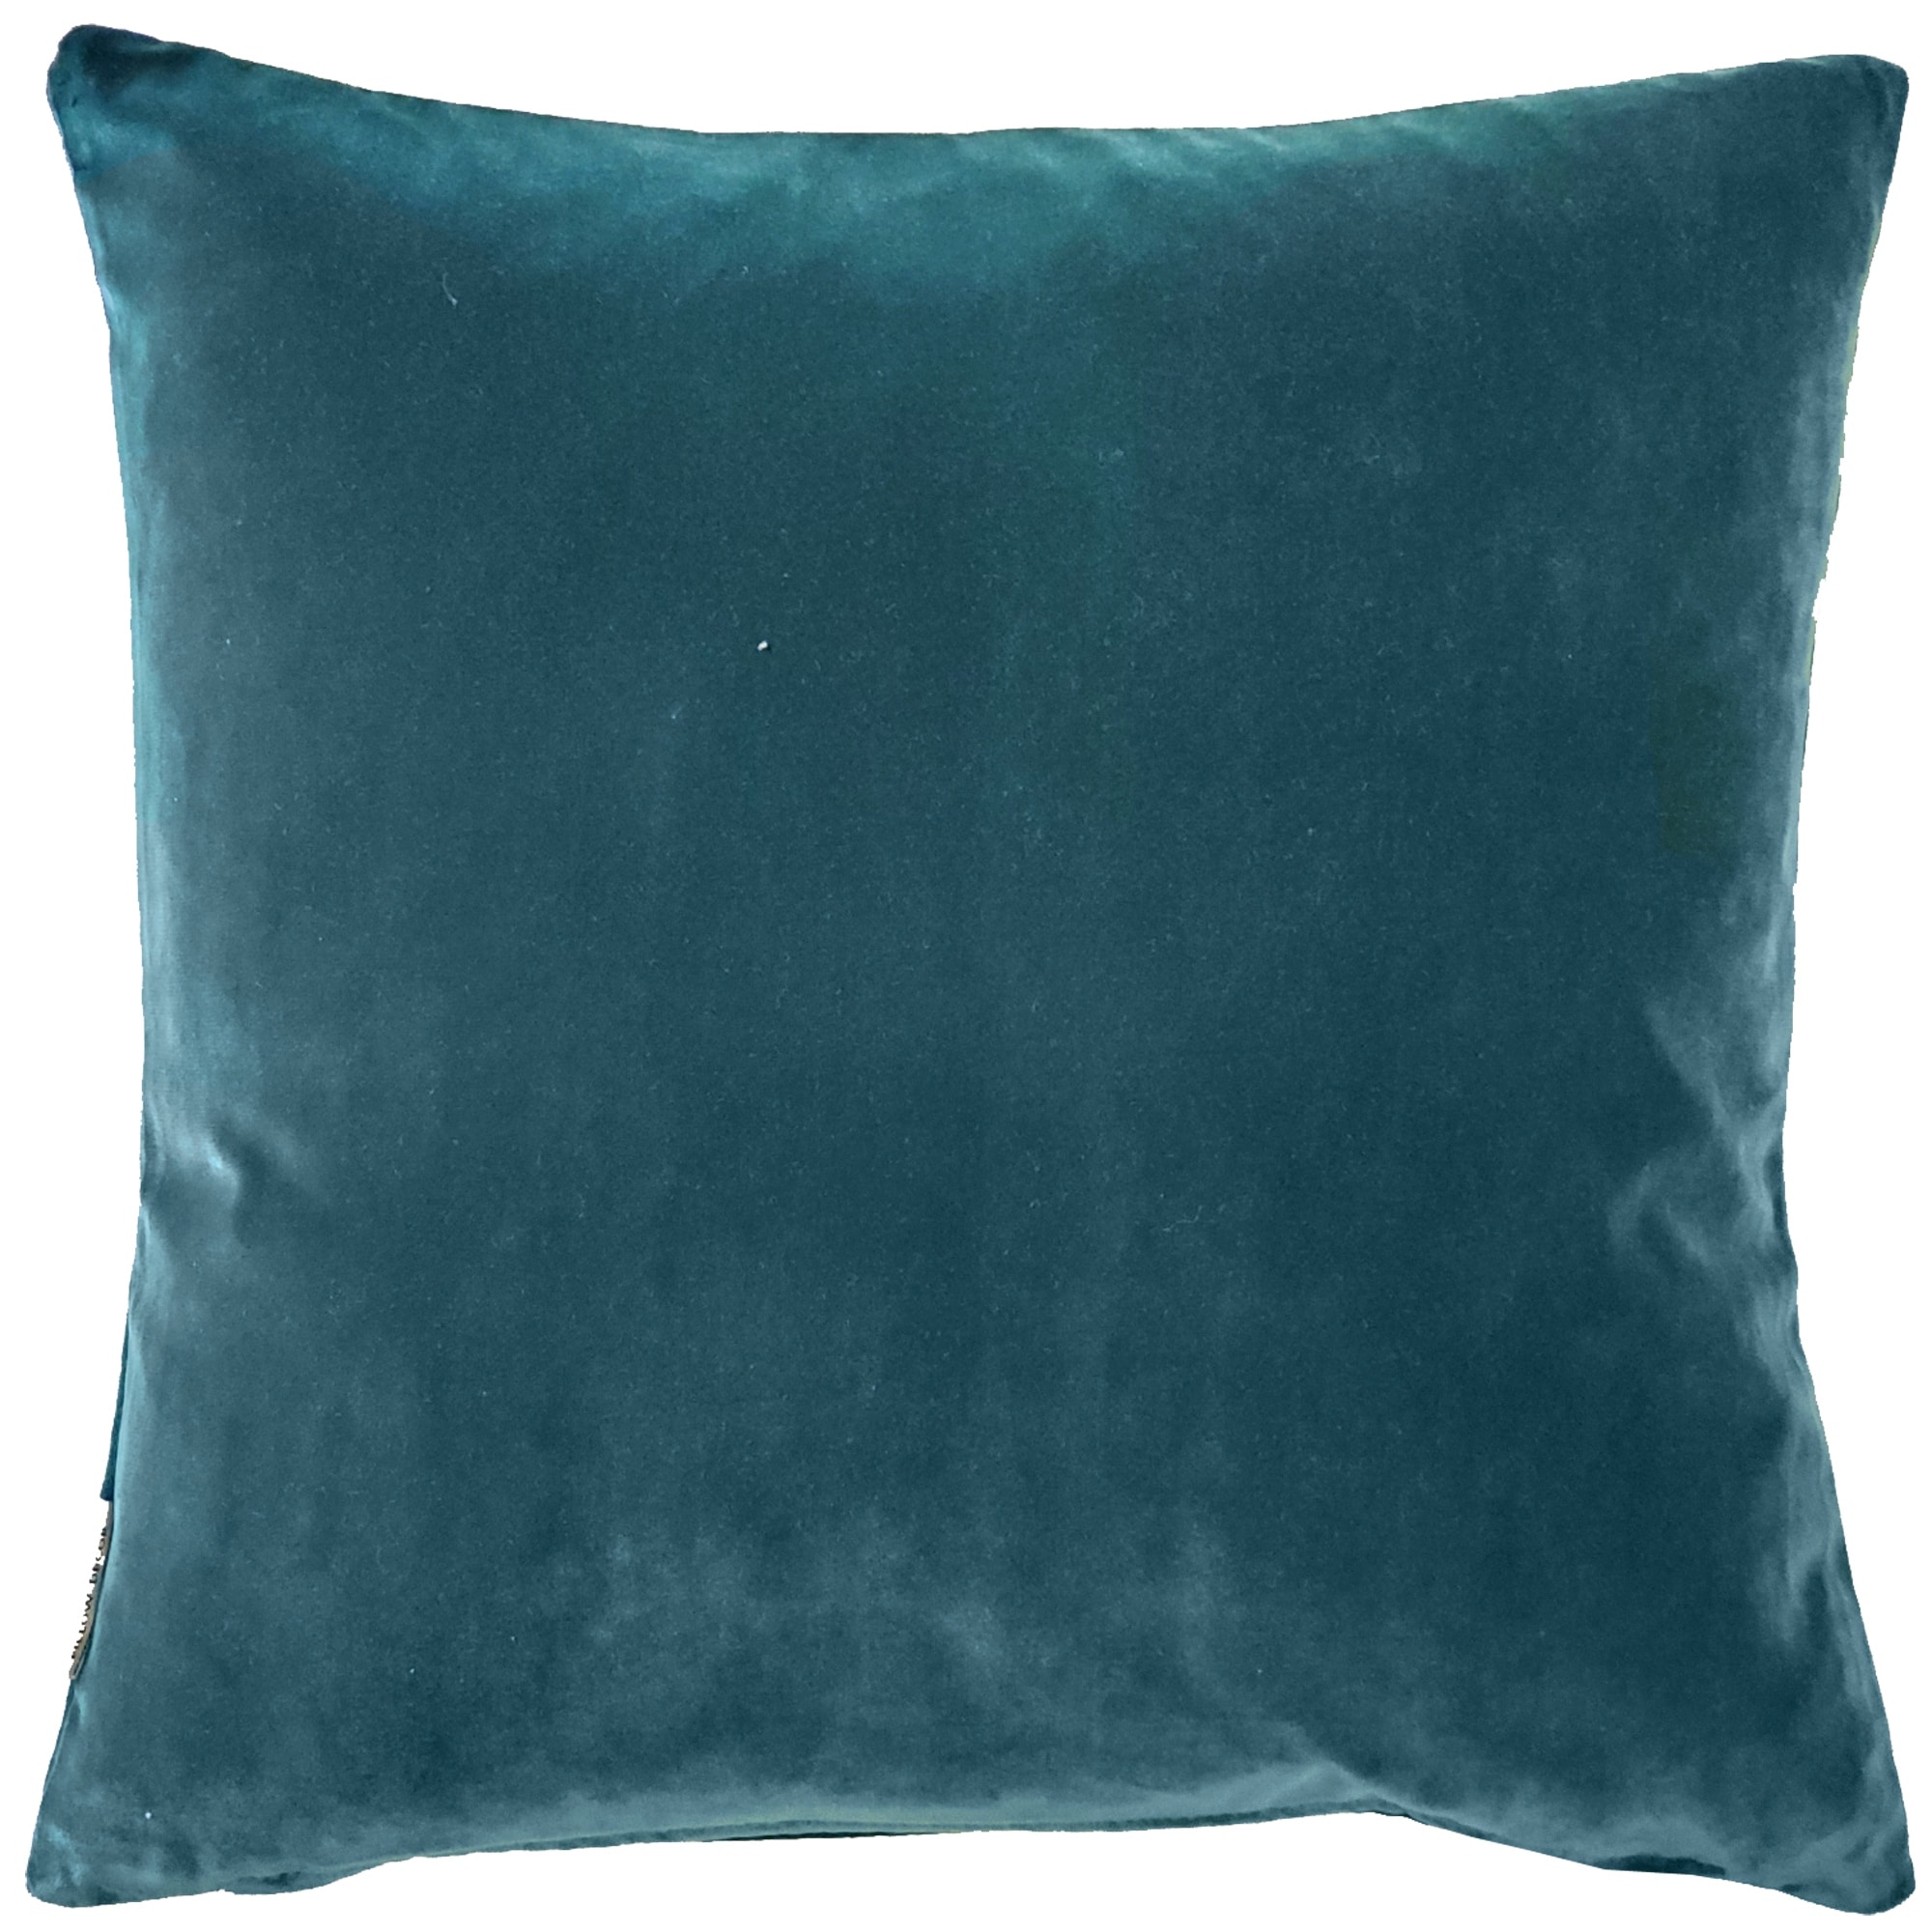 https://ak1.ostkcdn.com/images/products/is/images/direct/eef24d5ef8754e5ae348b6510f57e13e8bb7b21f/Pillow-Decor-Castello-Soft-Velvet-Throw-Pillows-%283-Sizes%2C-18-Colors%29.jpg